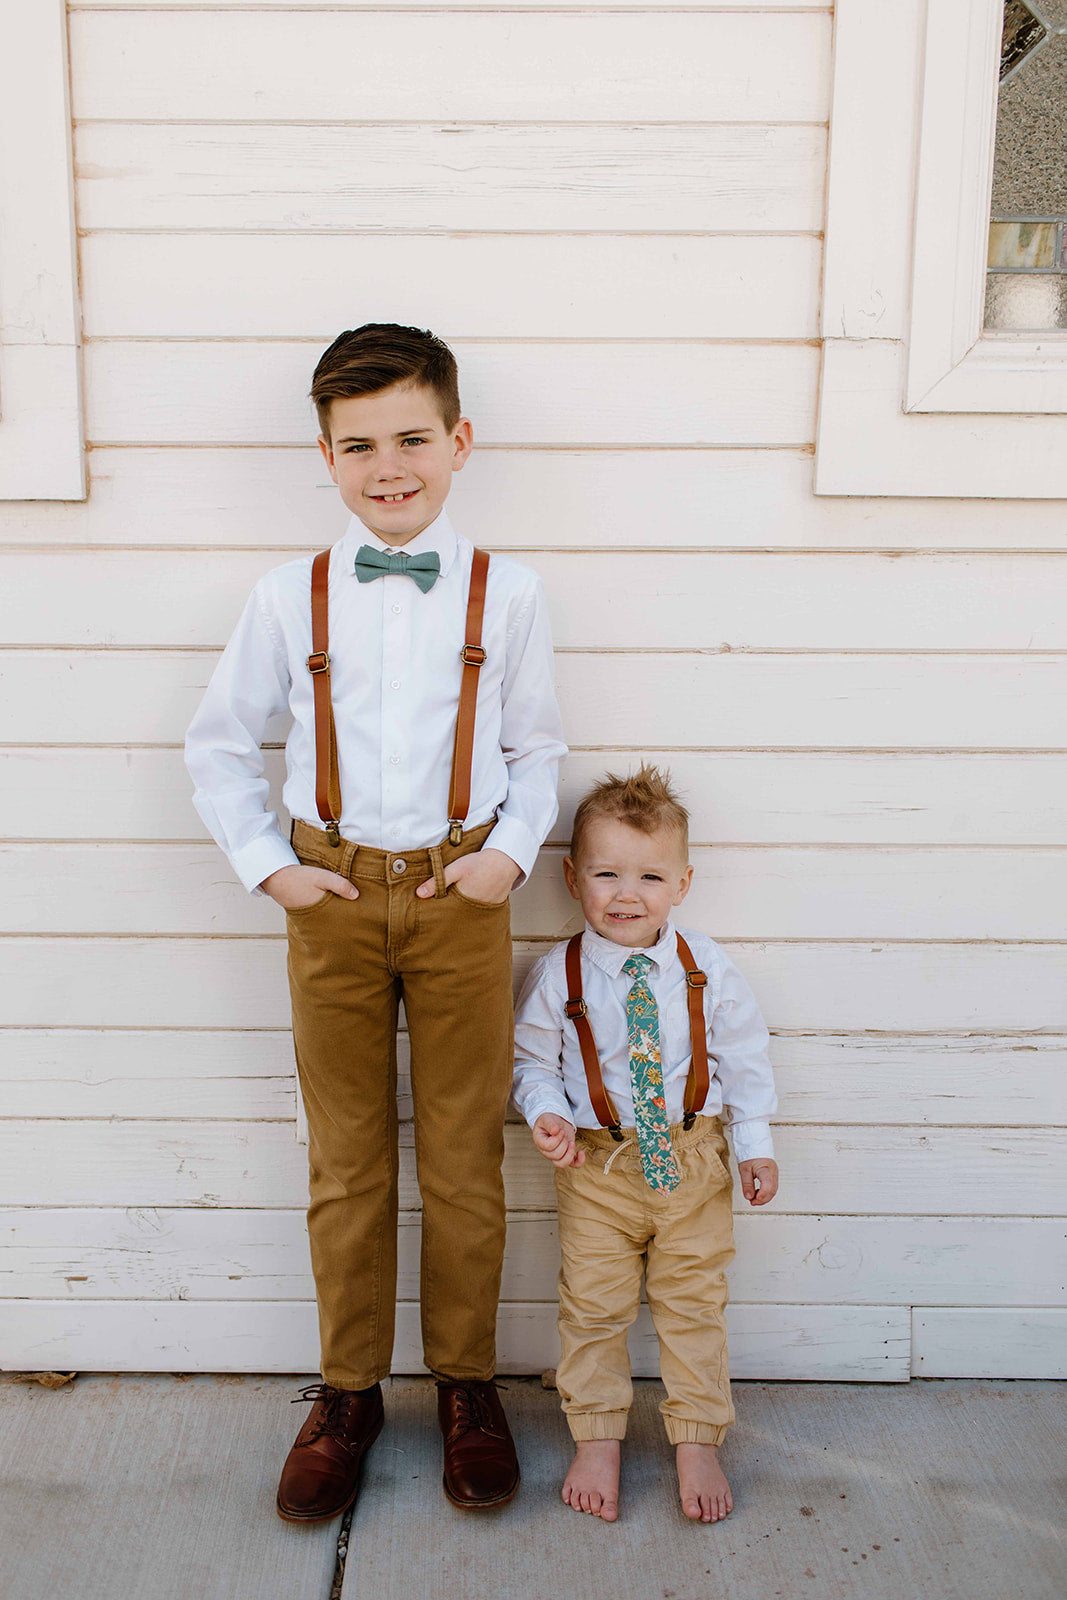 Men's Suspenders, Boys Suspenders, Tan Suspenders, Light Brown Suspenders,  Striped Suspenders, Boy Suspenders, for Children and Adults -  Canada